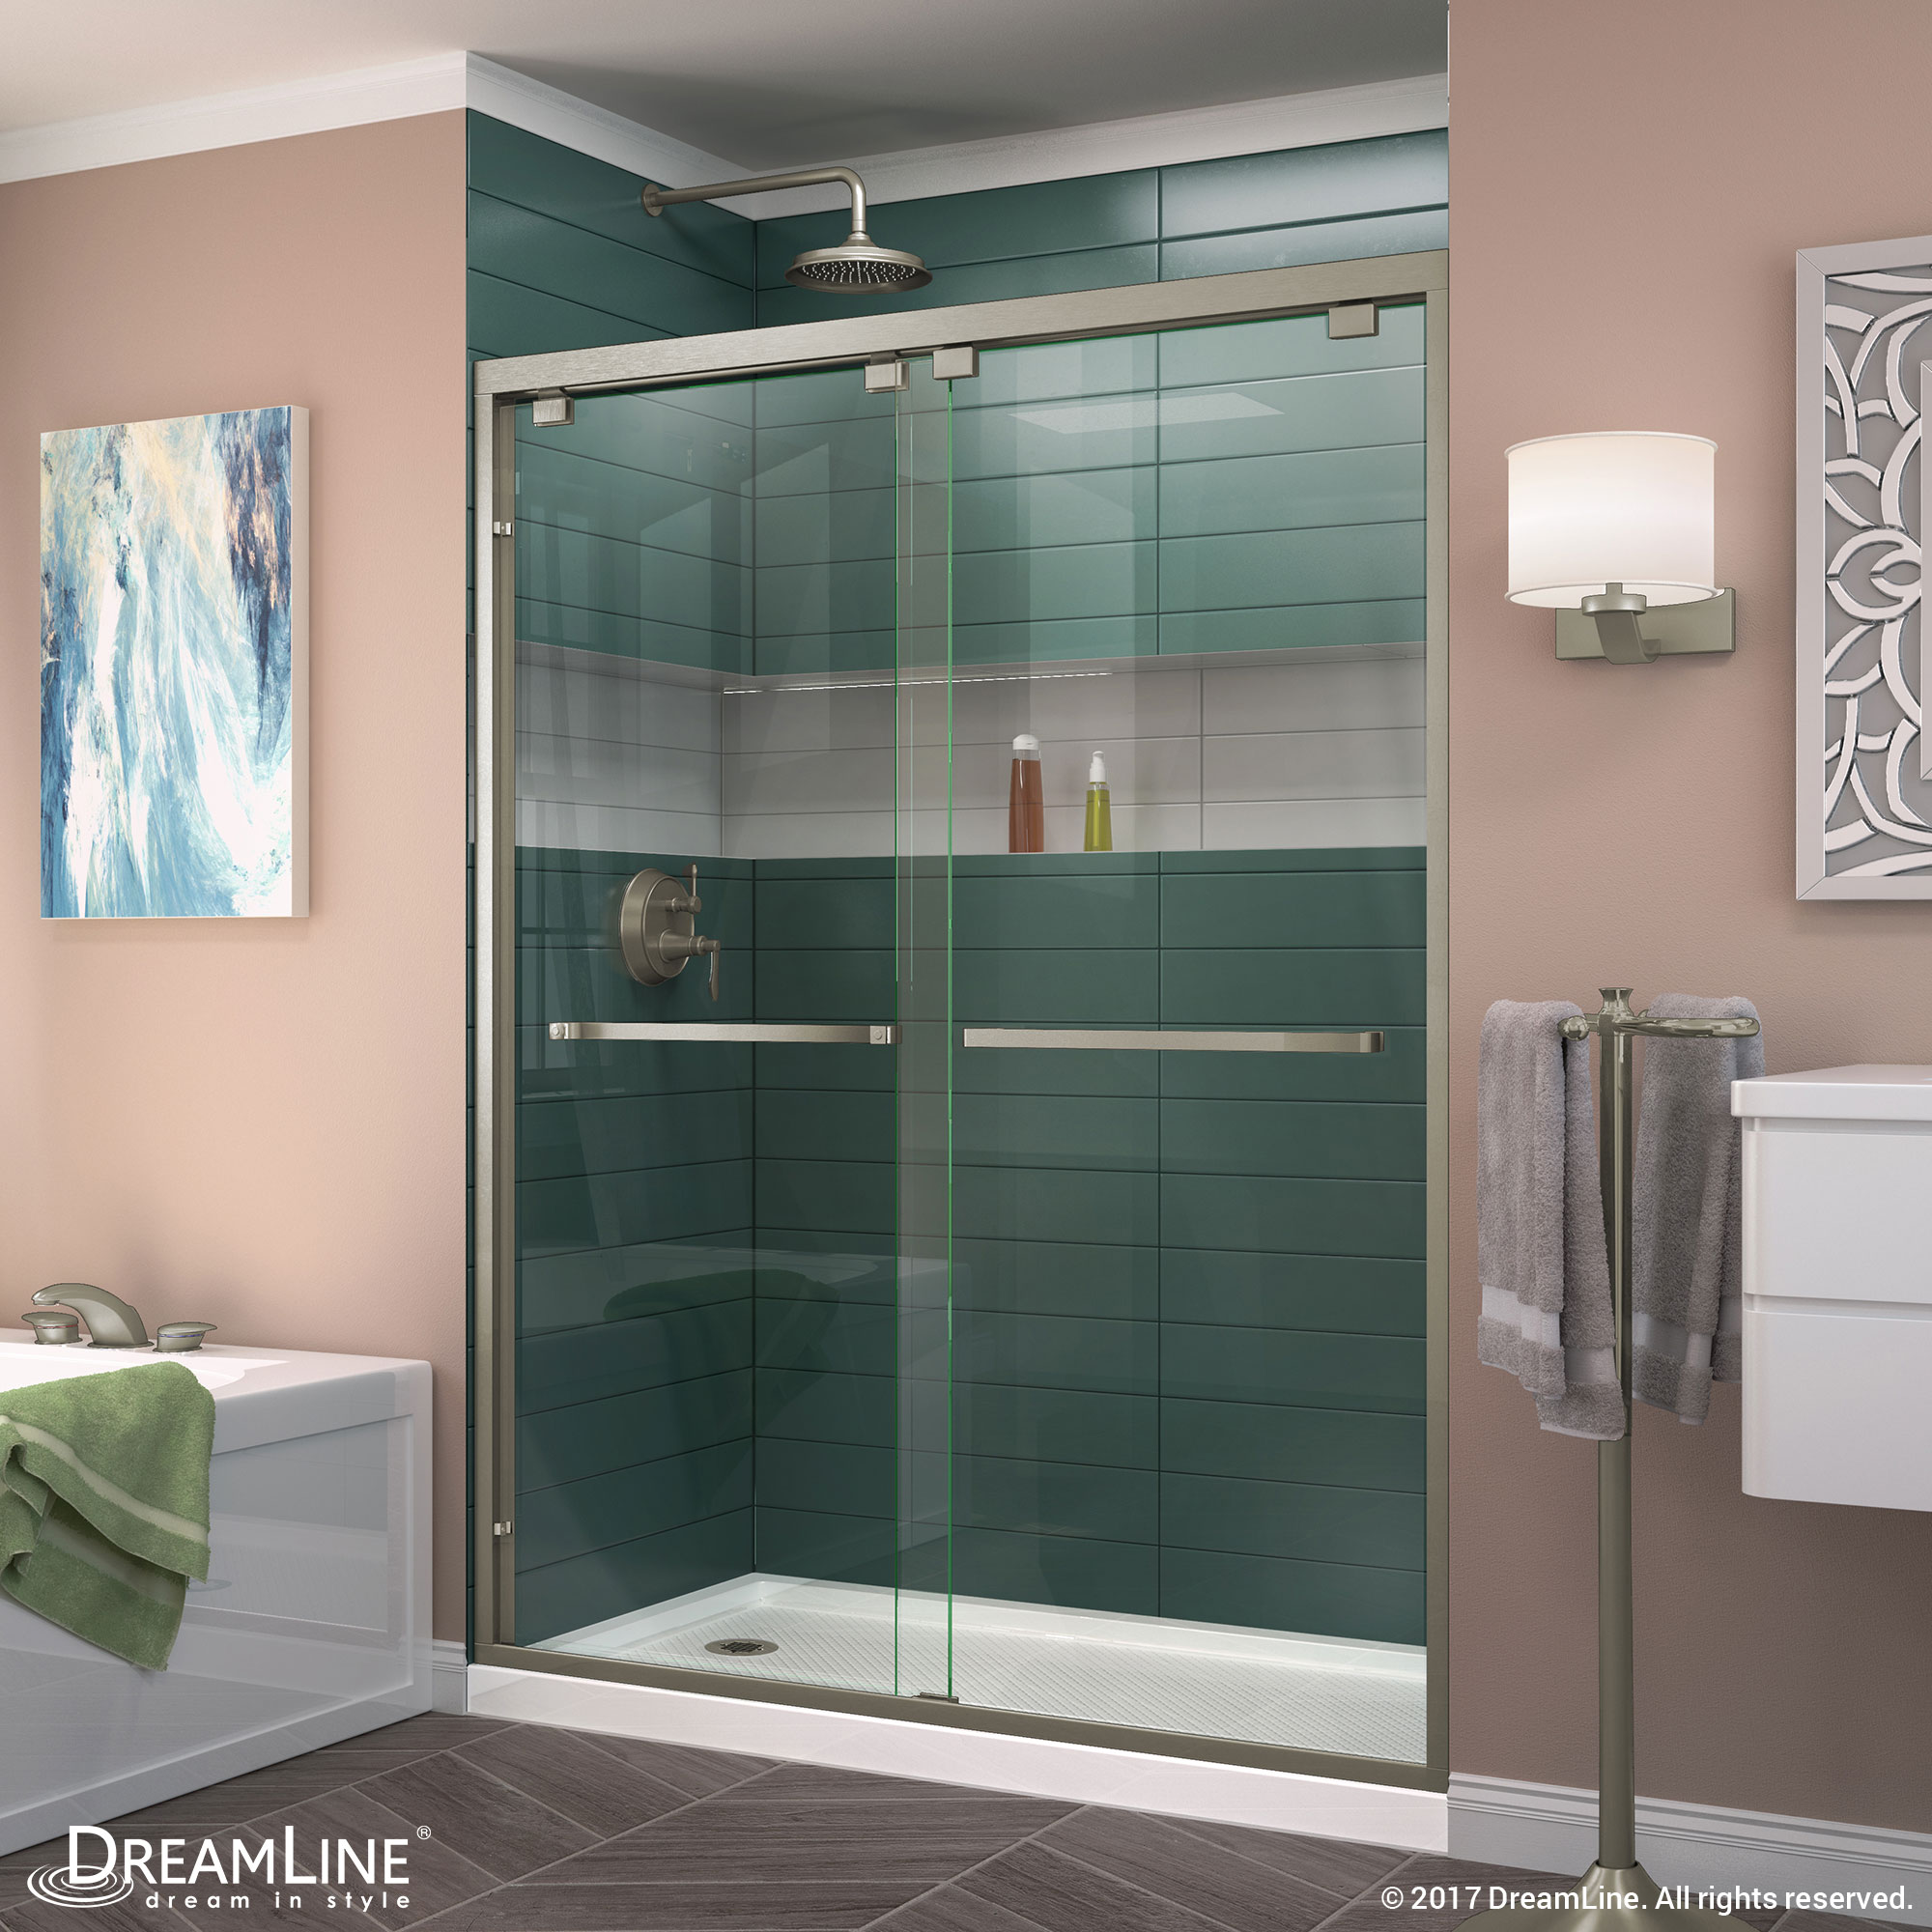 DreamLine Encore 32 in. D x 60 in. W x 78 3/4 in. H Bypass Shower Door in Chrome and Left Drain White Base Kit